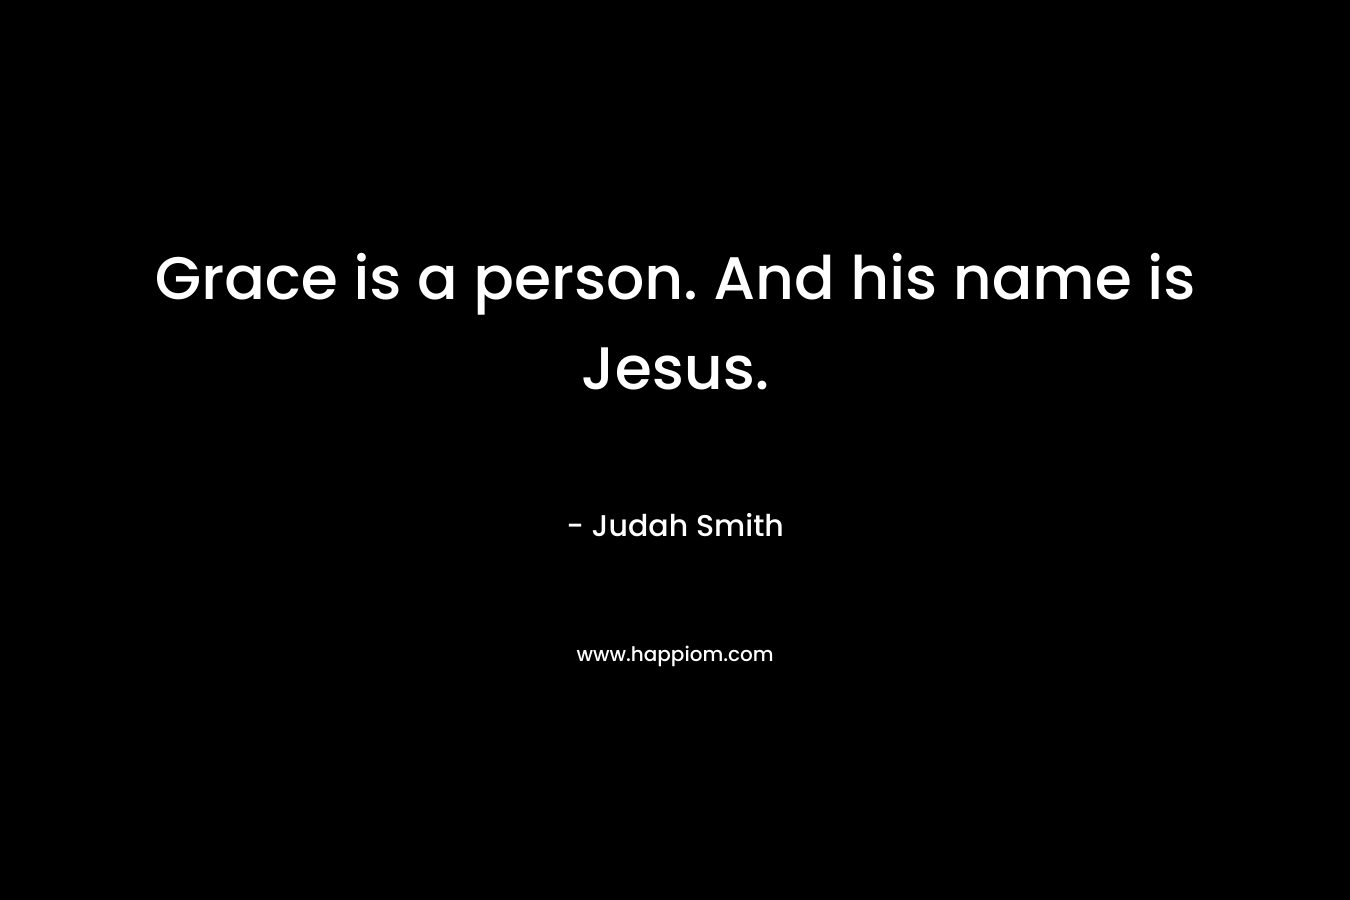 Grace is a person. And his name is Jesus.